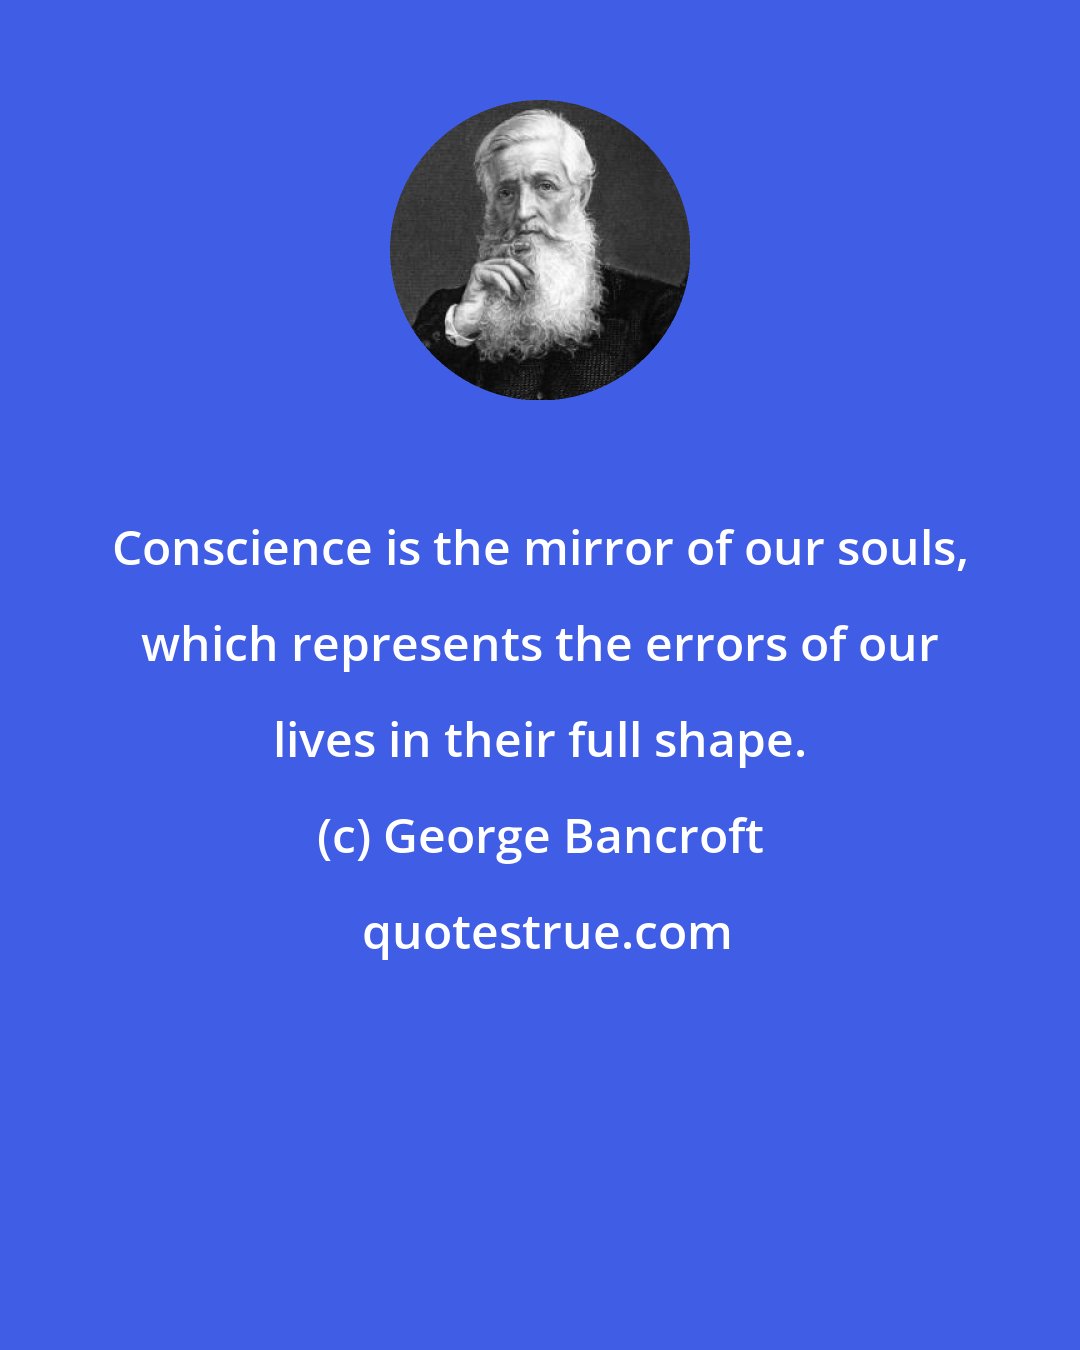 George Bancroft: Conscience is the mirror of our souls, which represents the errors of our lives in their full shape.